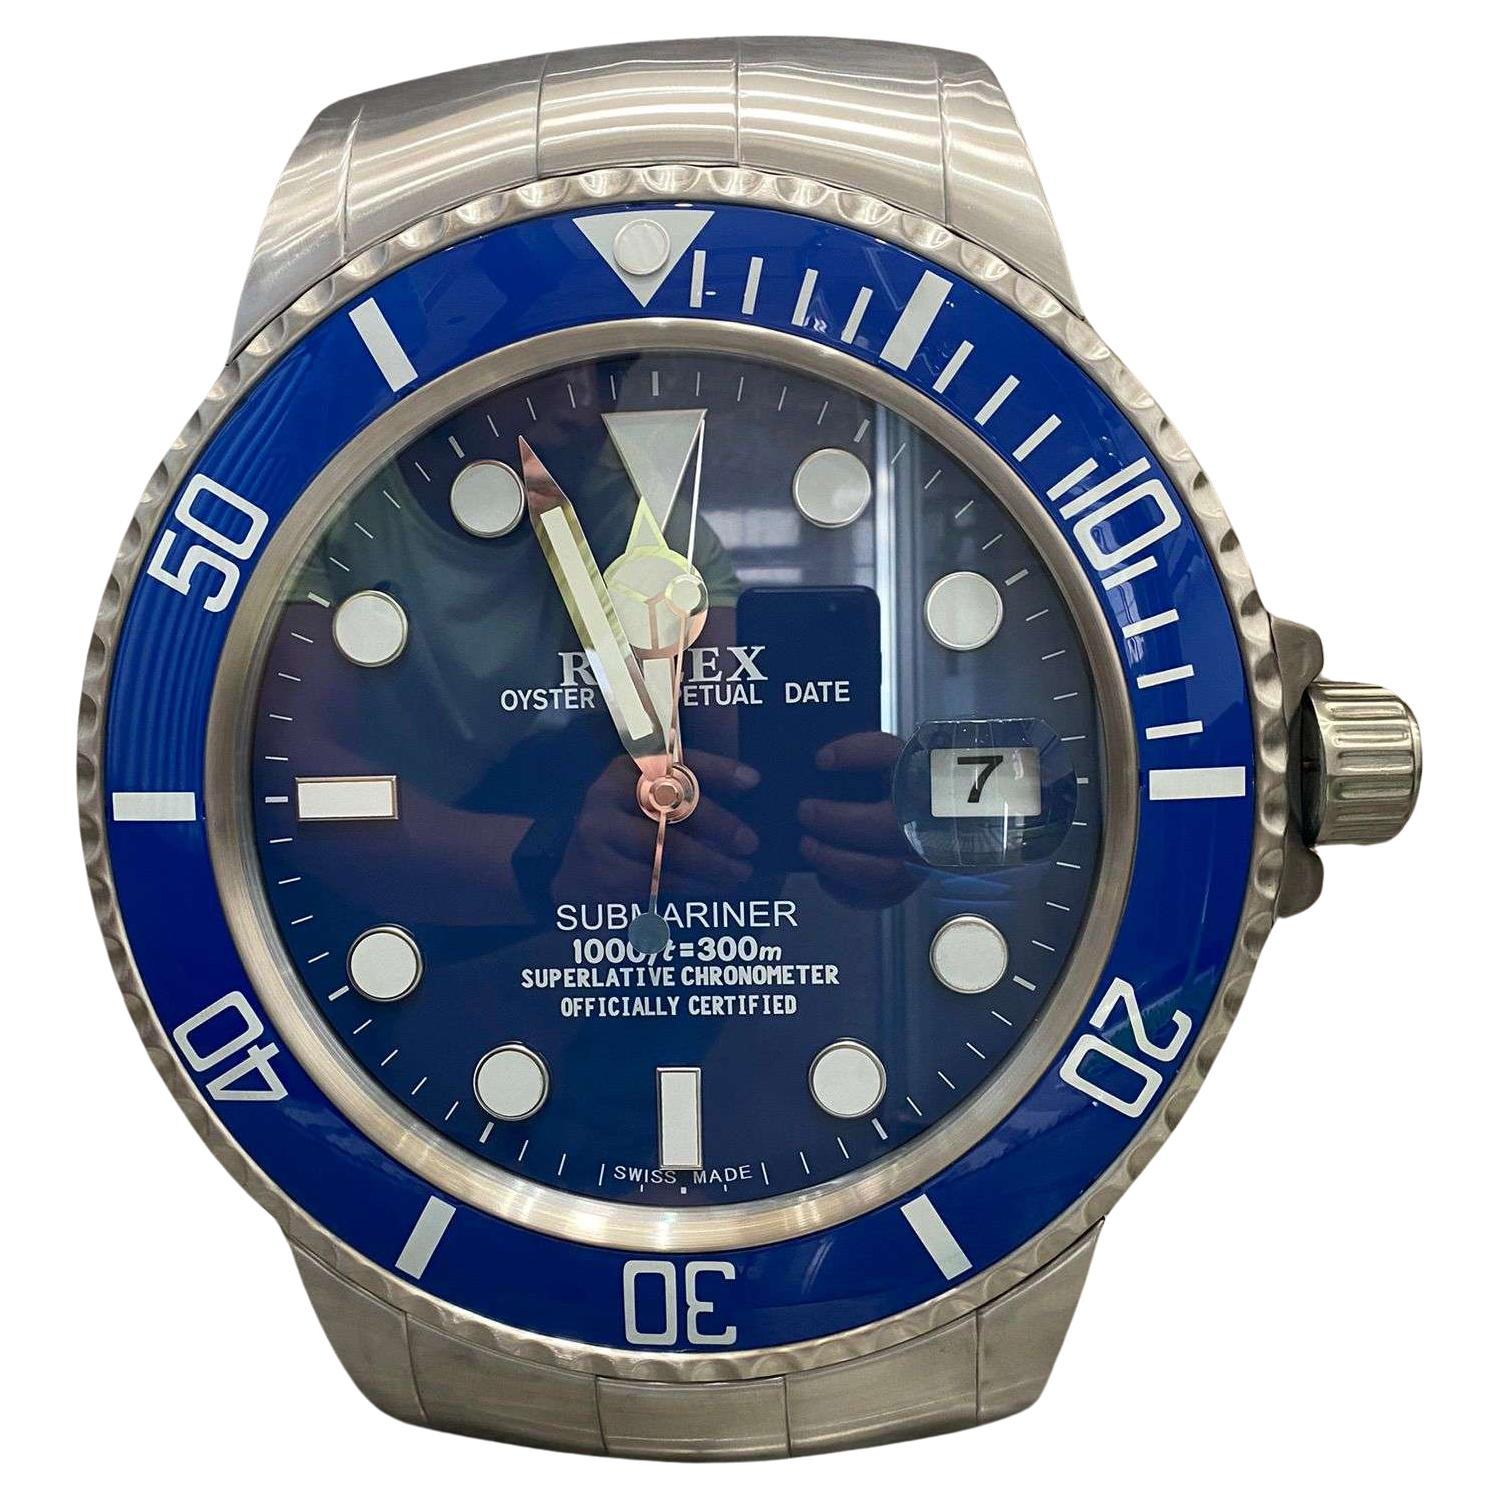 ROLEX Officially Certified Oyster Perpetual Date Blue Submariner Wall Clock  For Sale